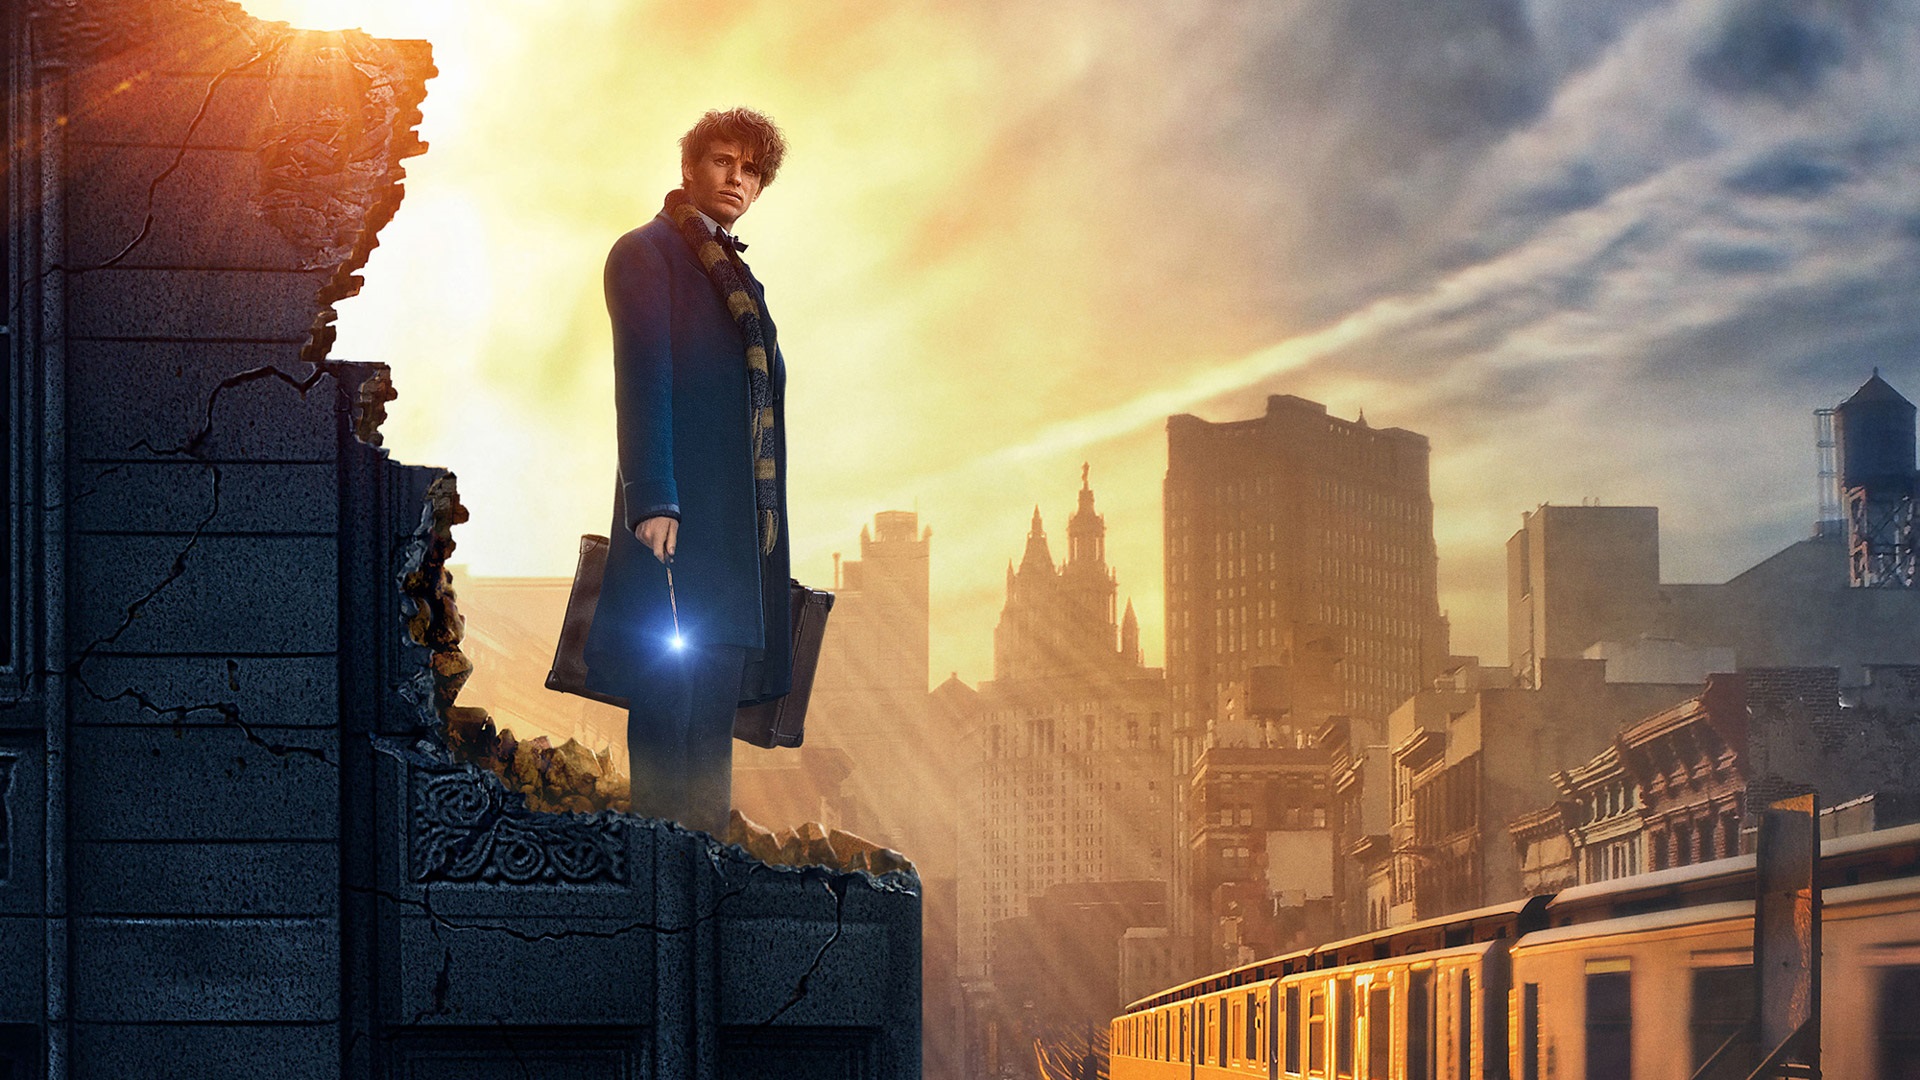 Fantastic Beasts and Where to Find Them for windows download free